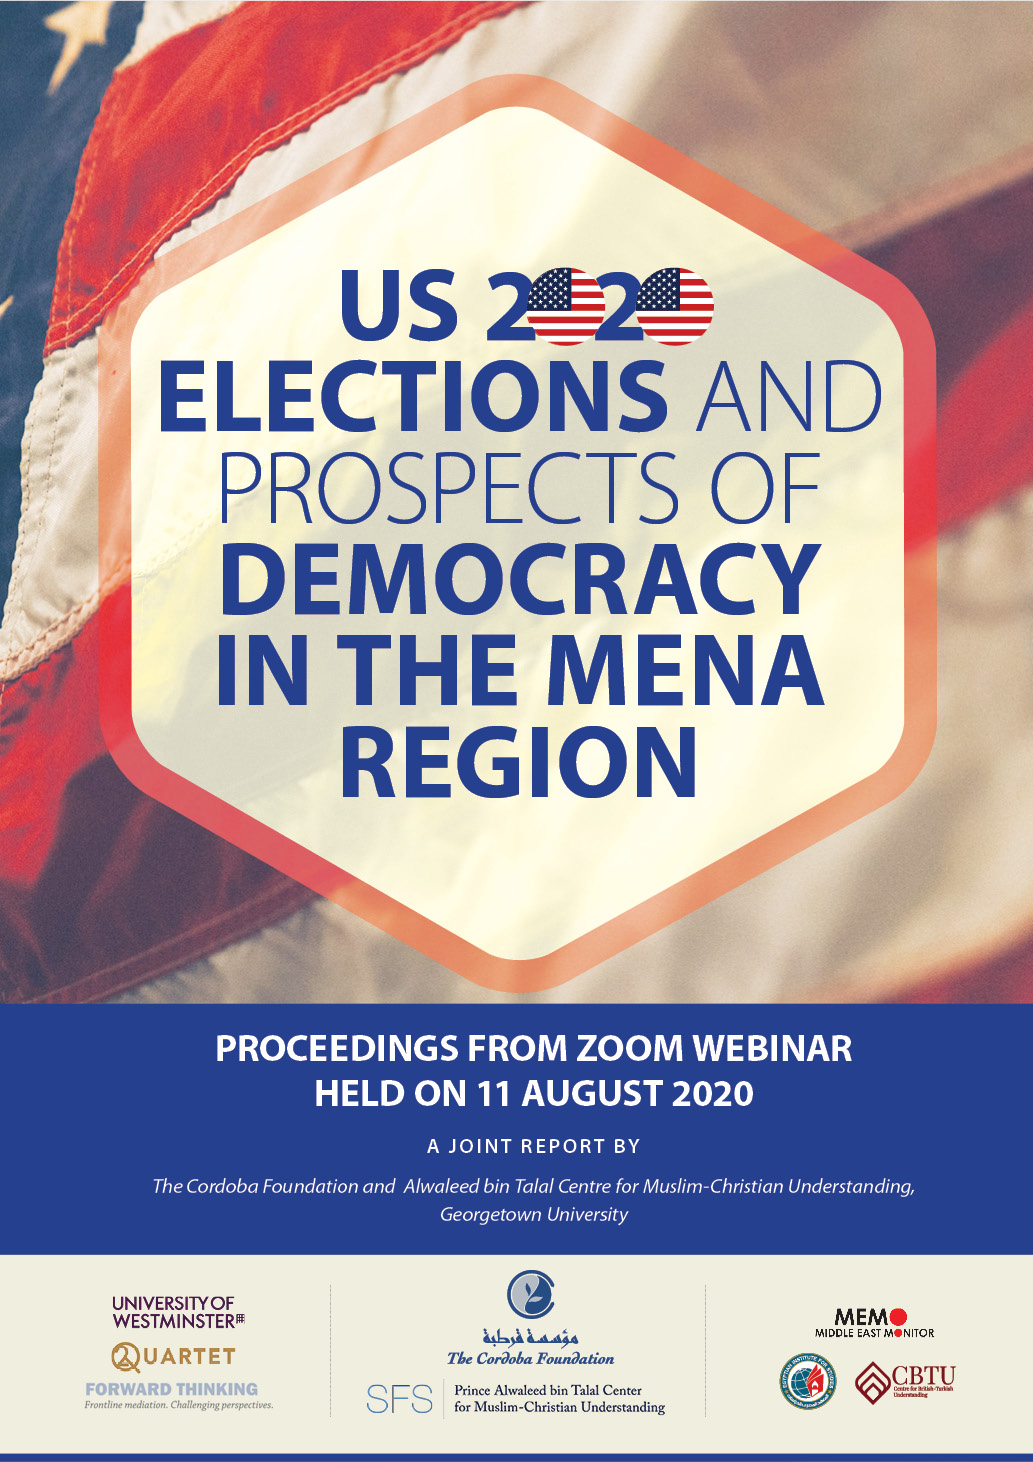 Webinar Report: US 2020 Elections and Prospects of Democracy in the MENA Region